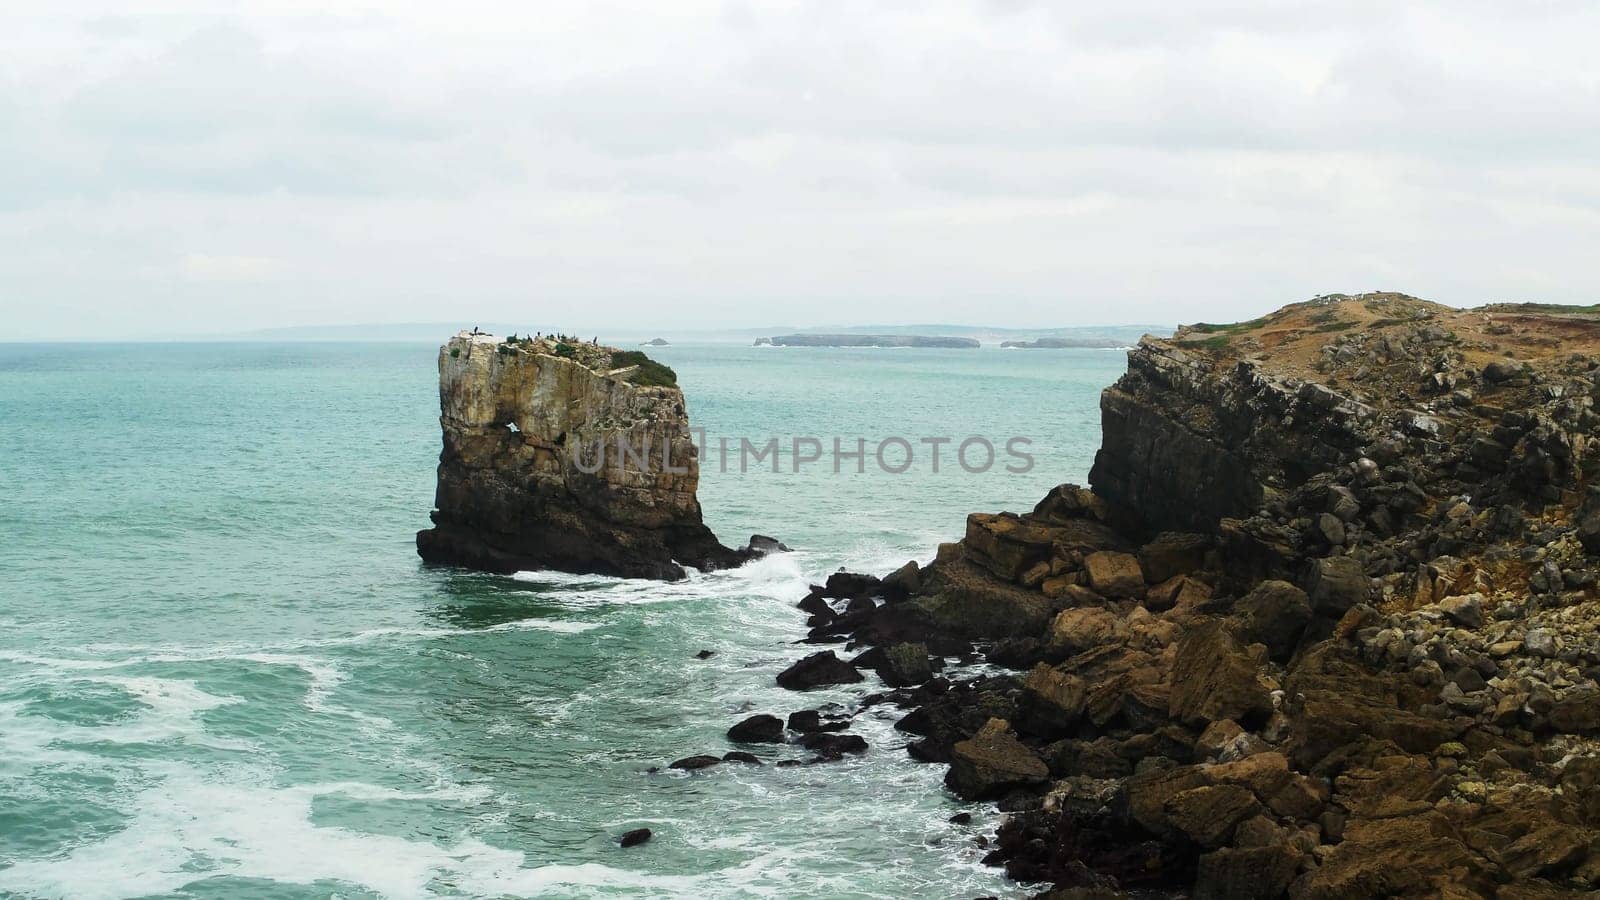 View of the sea and rocks in Peniche, Portugal